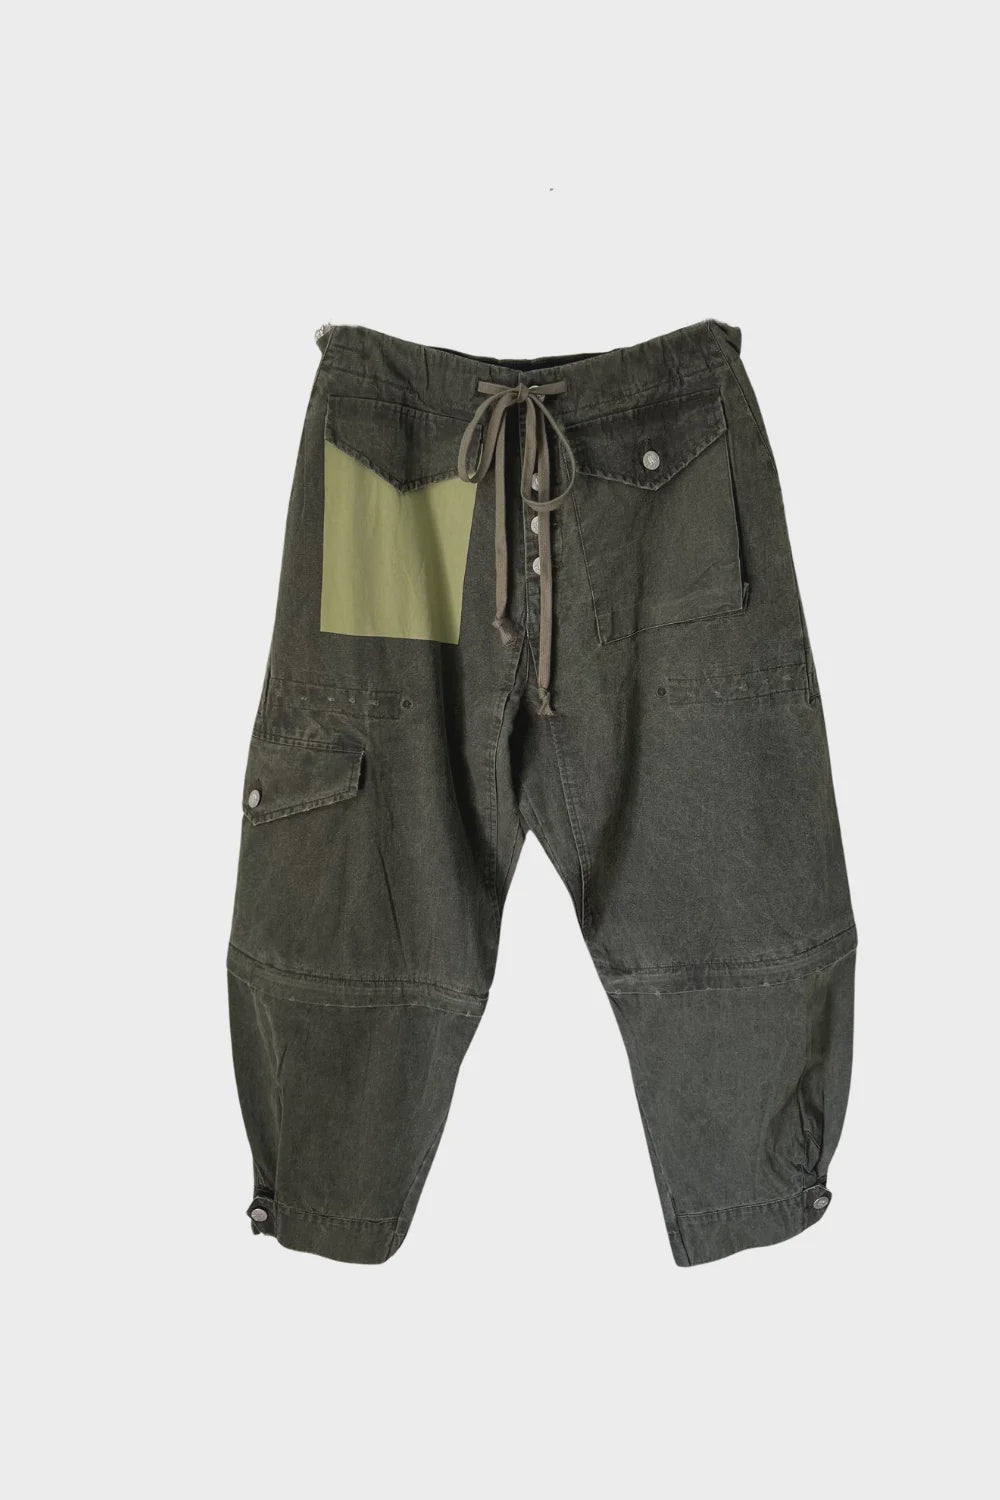 M. A. Dainty Trucker Pant Olive